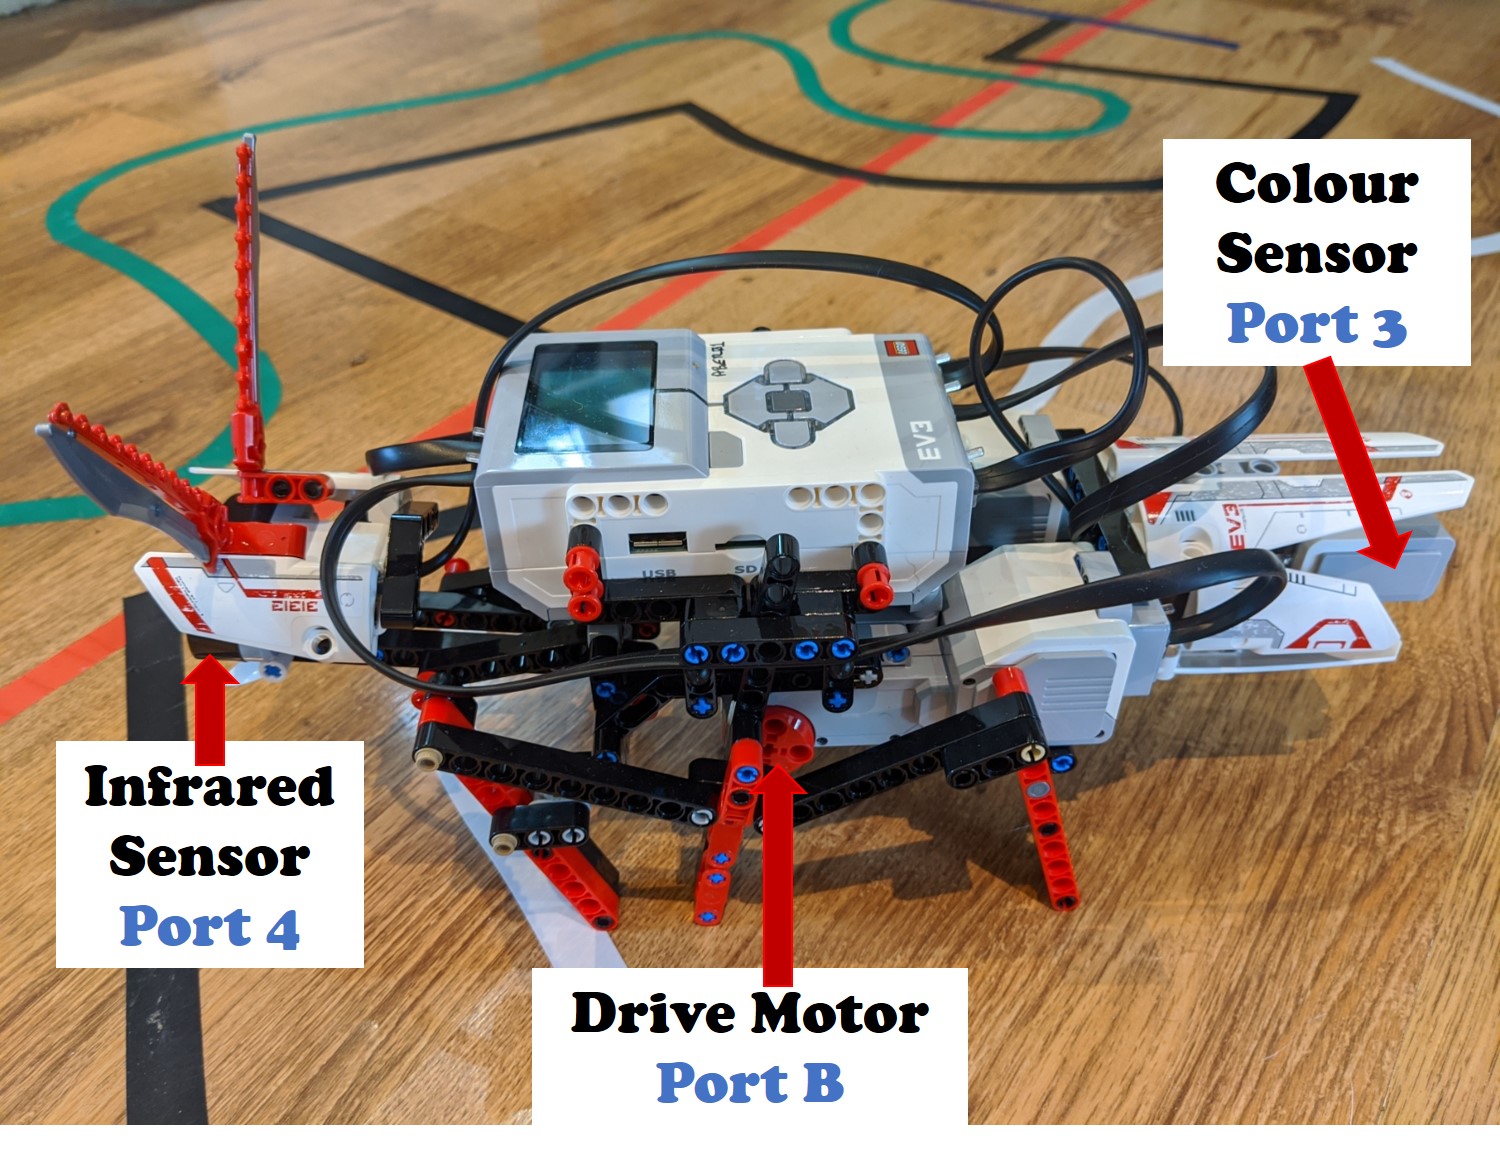 Side view of the Antsy unit. Three legs either side connected to drive motors (left is on port B, right legs on port C motor). The head houses an InfraRed sensor connected to port 4 and the 'tail' is a colour sensor connected to port 3